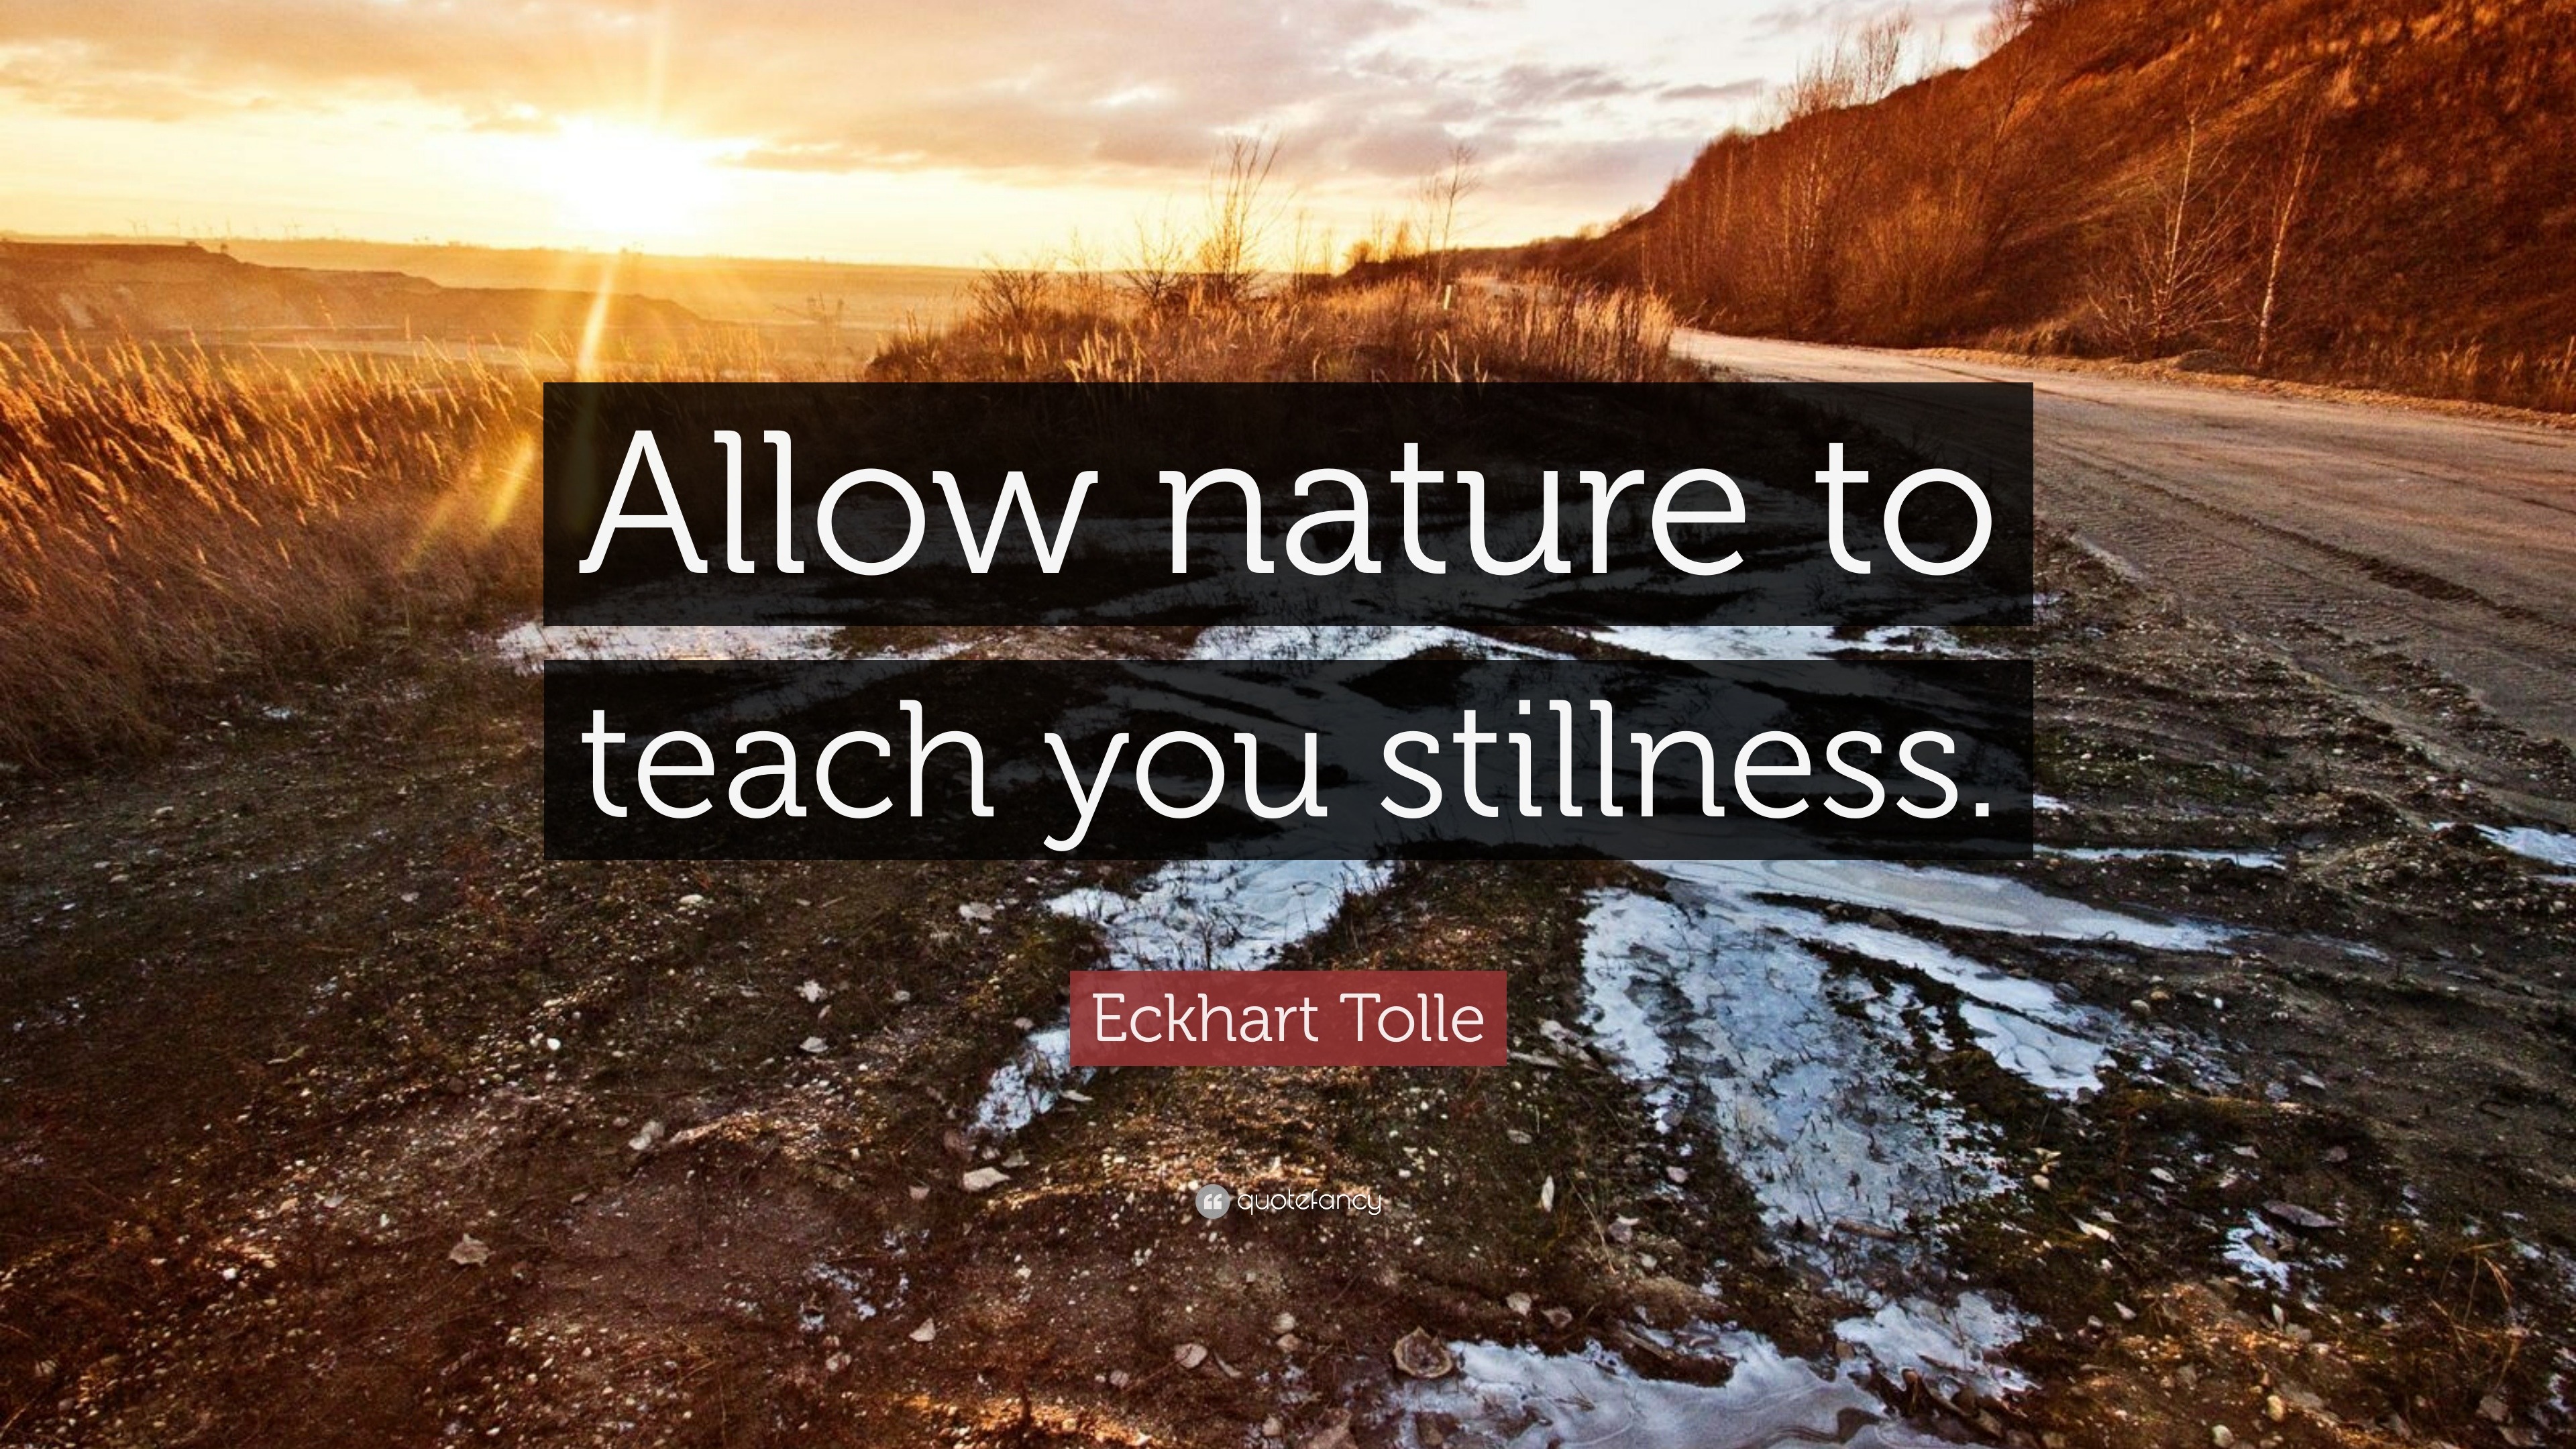 frugter Miniature ved godt Eckhart Tolle Quote: “Allow nature to teach you stillness.”